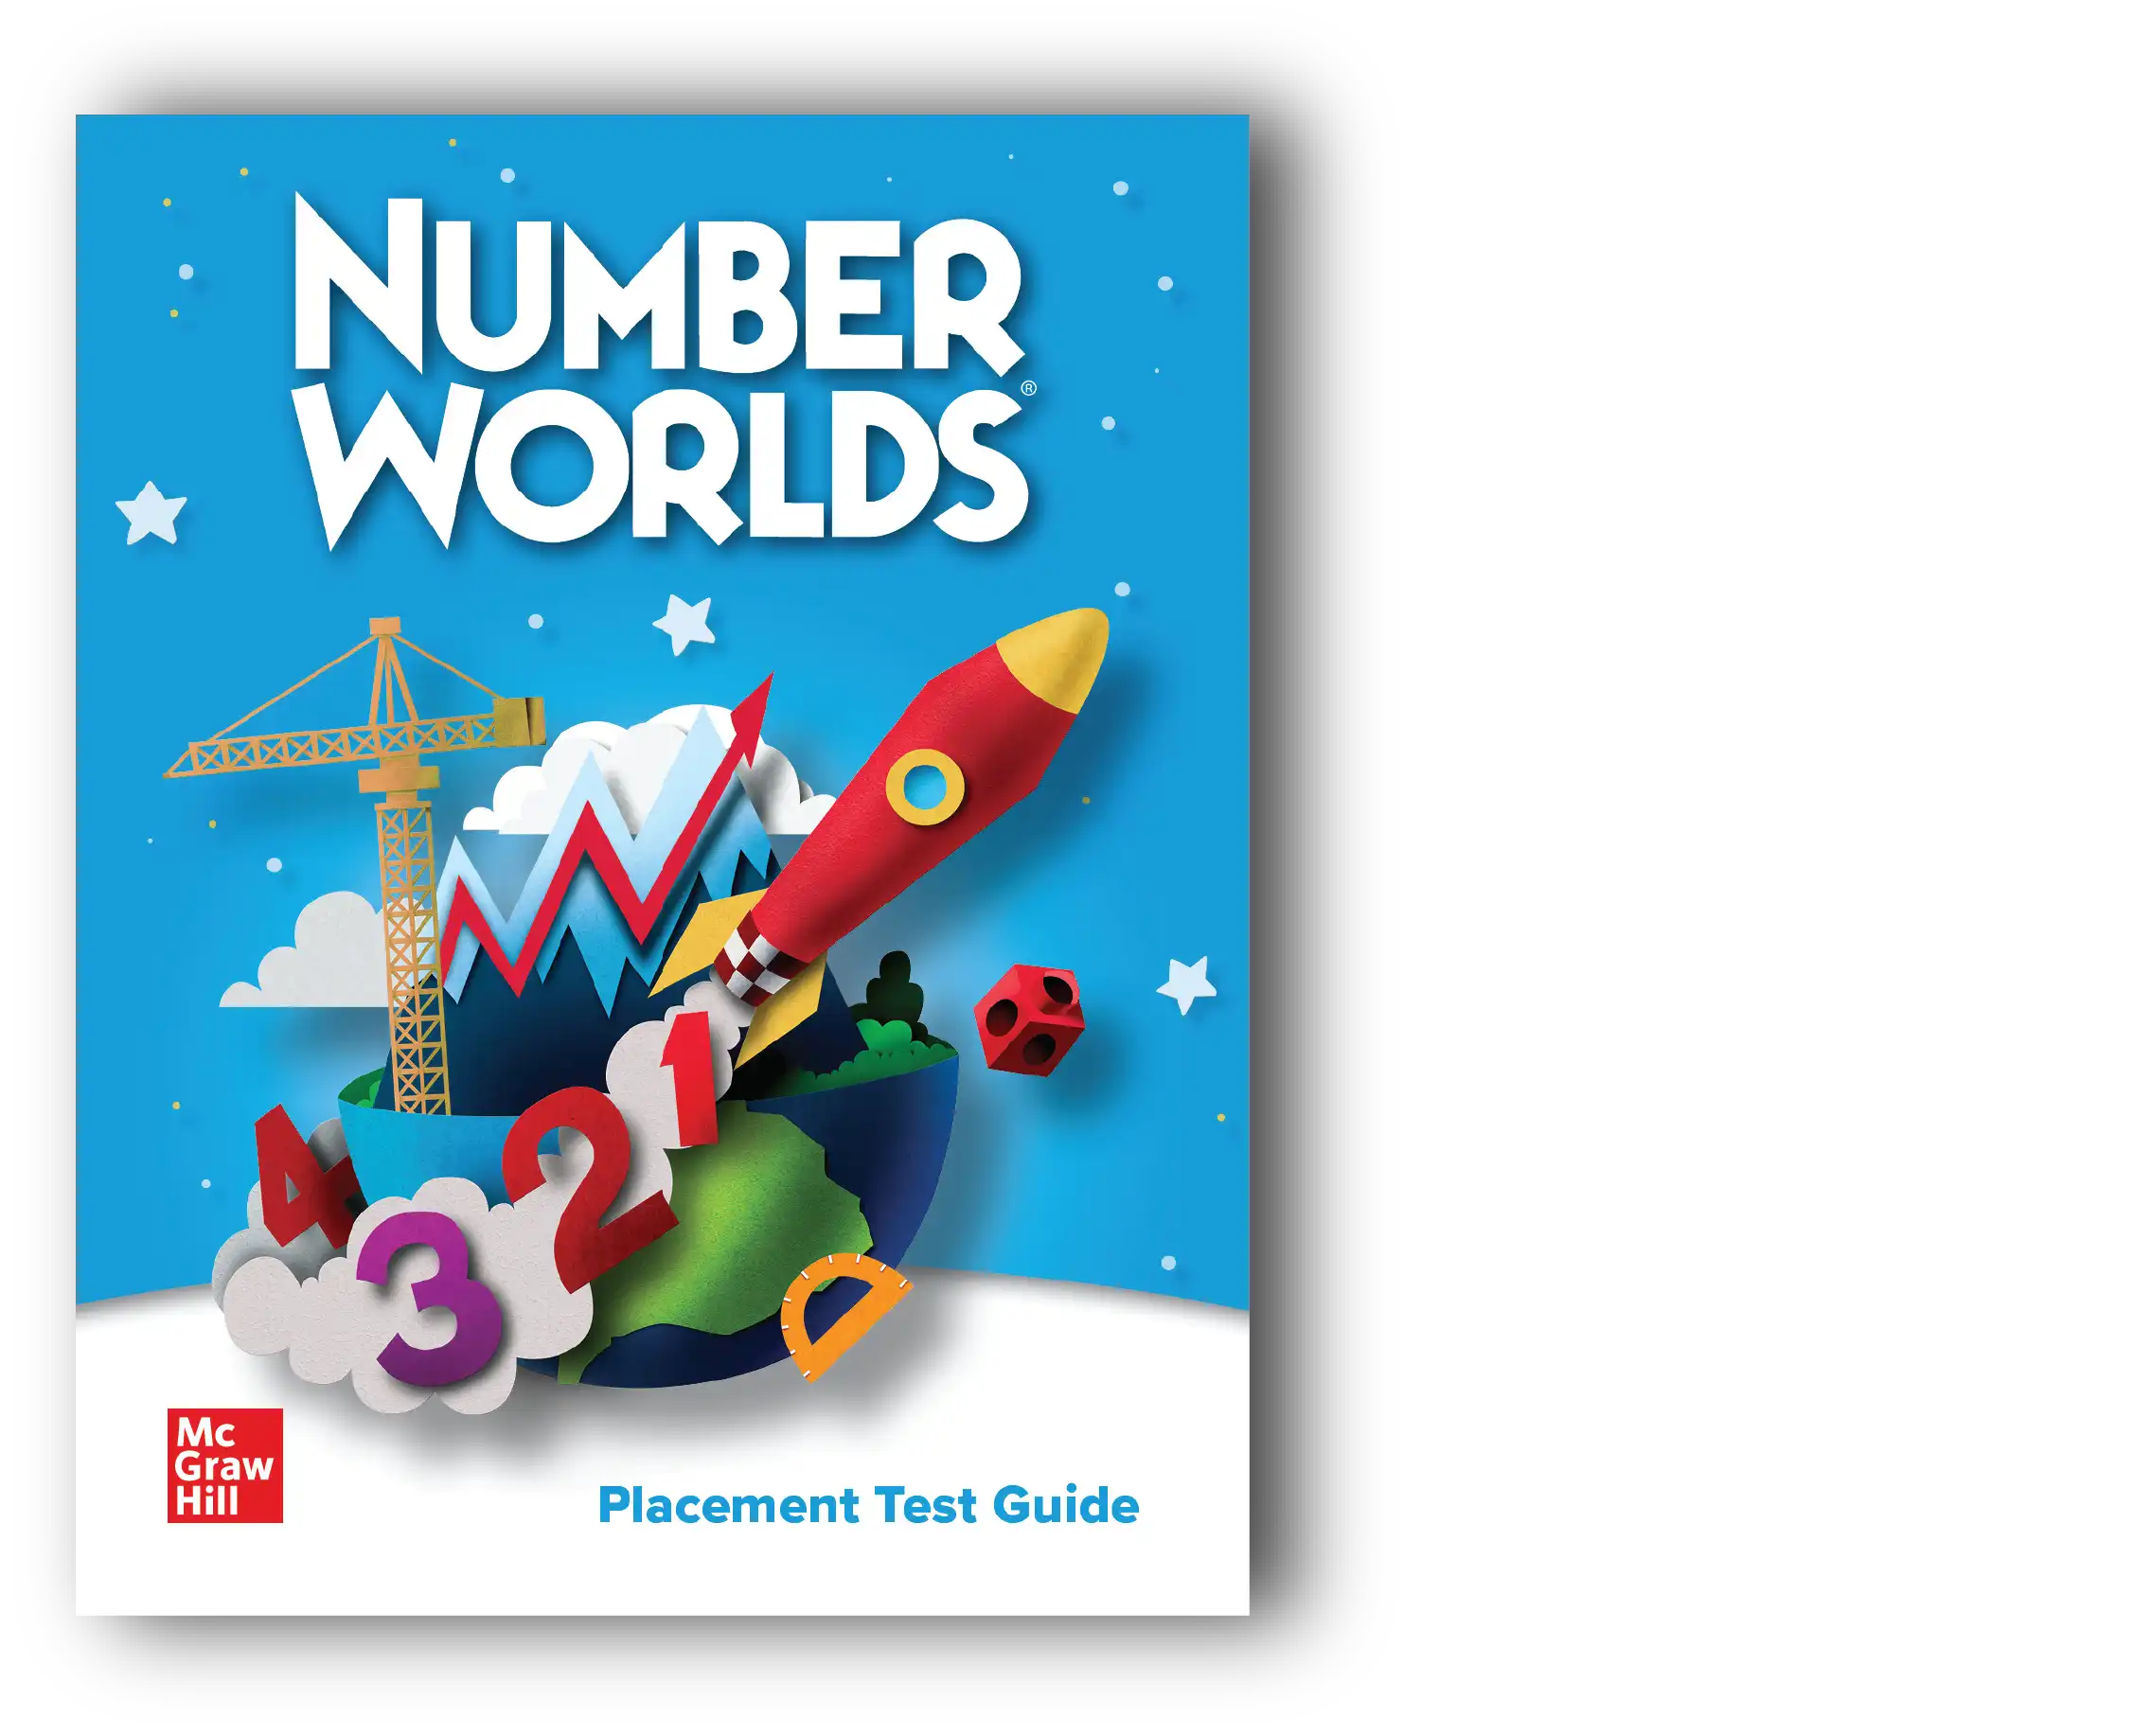 Number Worlds Placement Test Guide cover